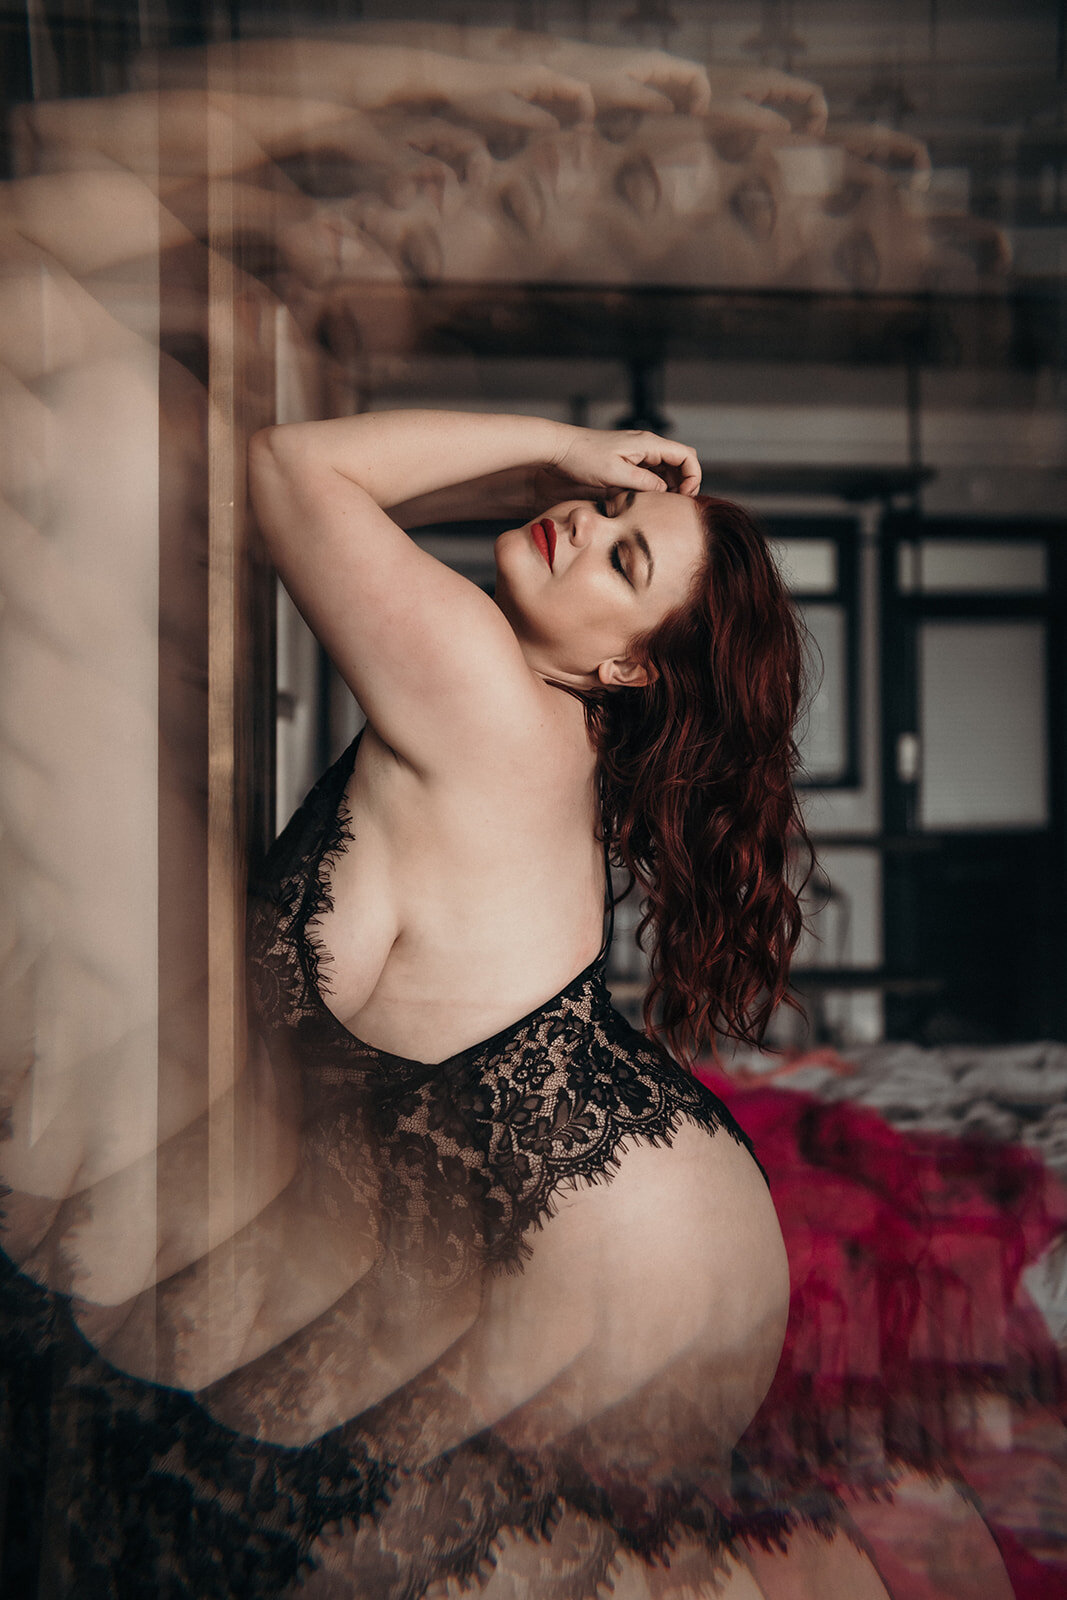 bc-vancouverisland-vancouver-gibsons-photographer-photography-boudoirphotographer-weddingphotographer-artistic-cinematic-outdoorphotography-femaleempowerment-sexy-sensual-pnw-neutral-stylistic-themed-Ruby Roxx-4194